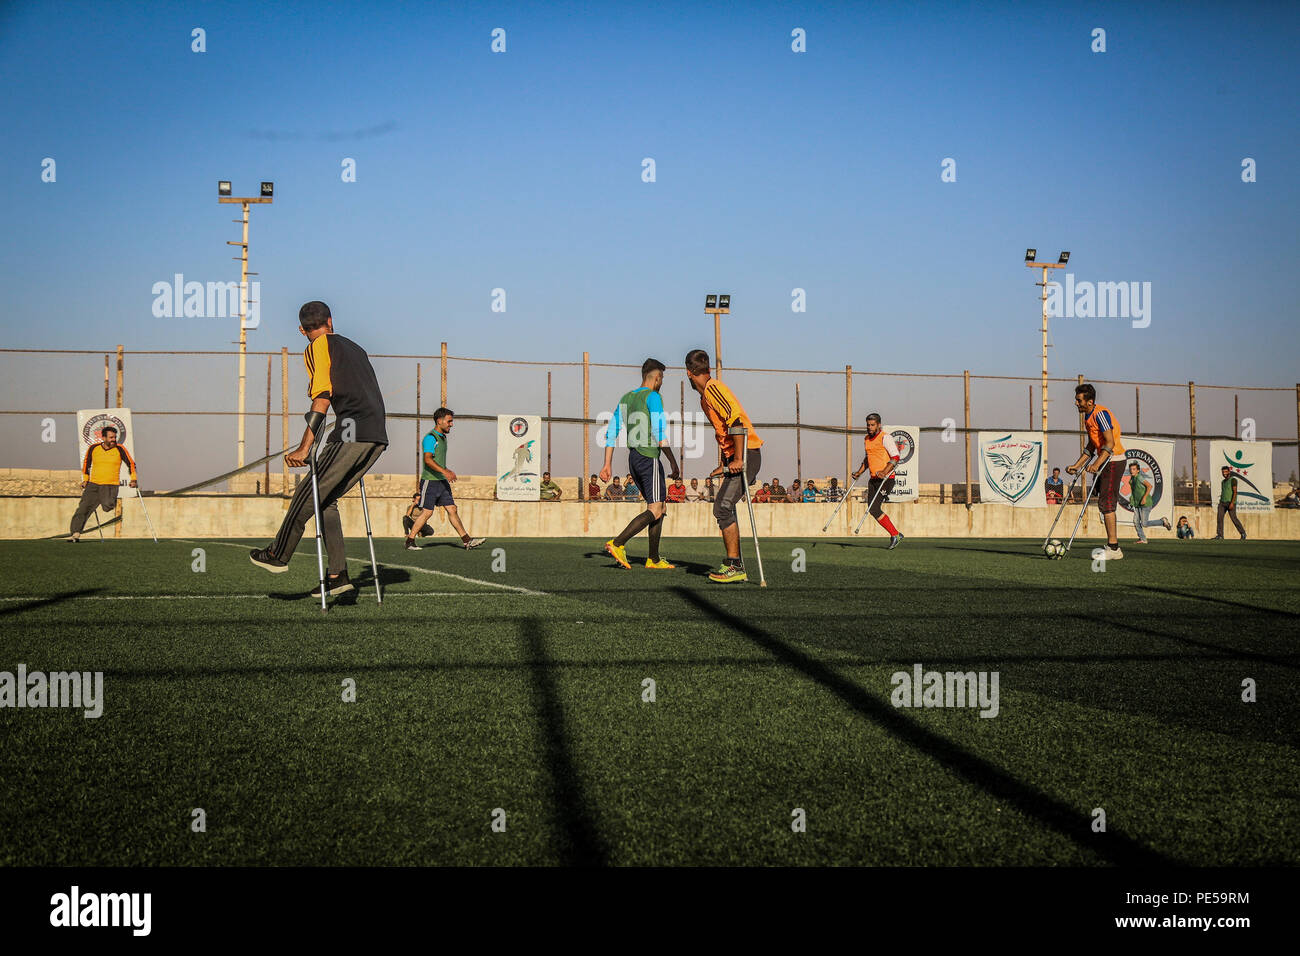 The disabled youths are seen playing soccer. A group of Syrian youths who have been injured and disabled as a result of the war came together and created a football team. The team has started in early 2018 and their dream is to be able to take part in the Paralympic games in 2020. Stock Photo